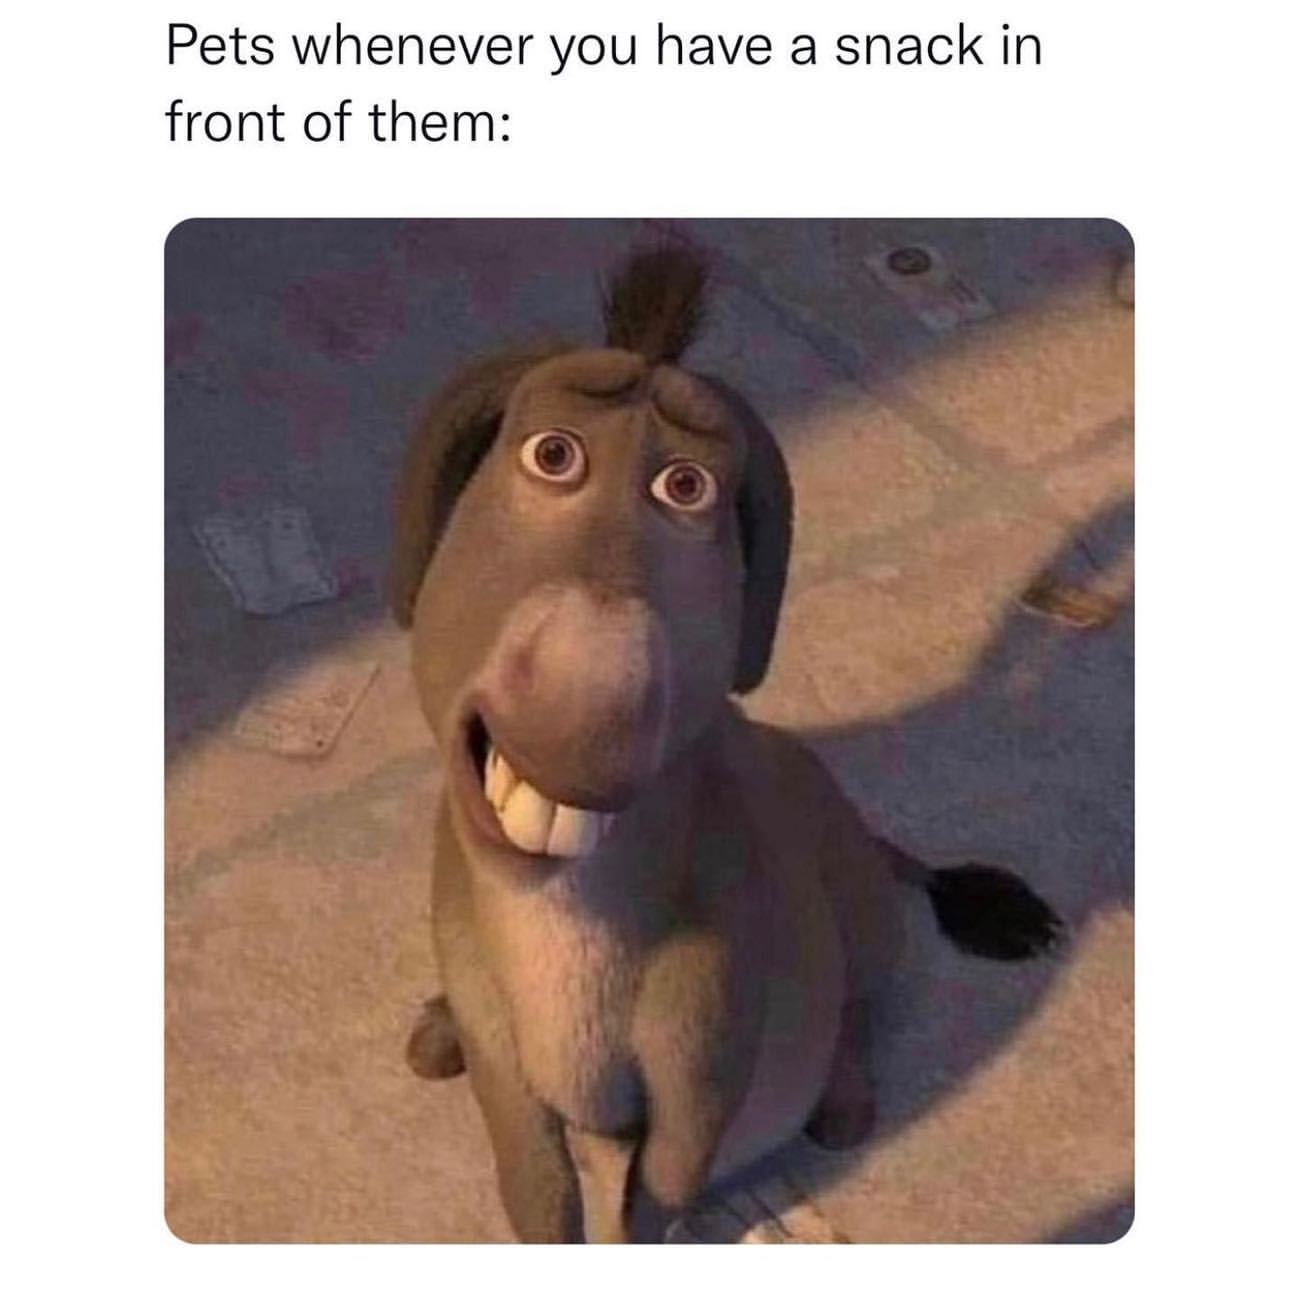 Pets whenever you have a snack in front of them: